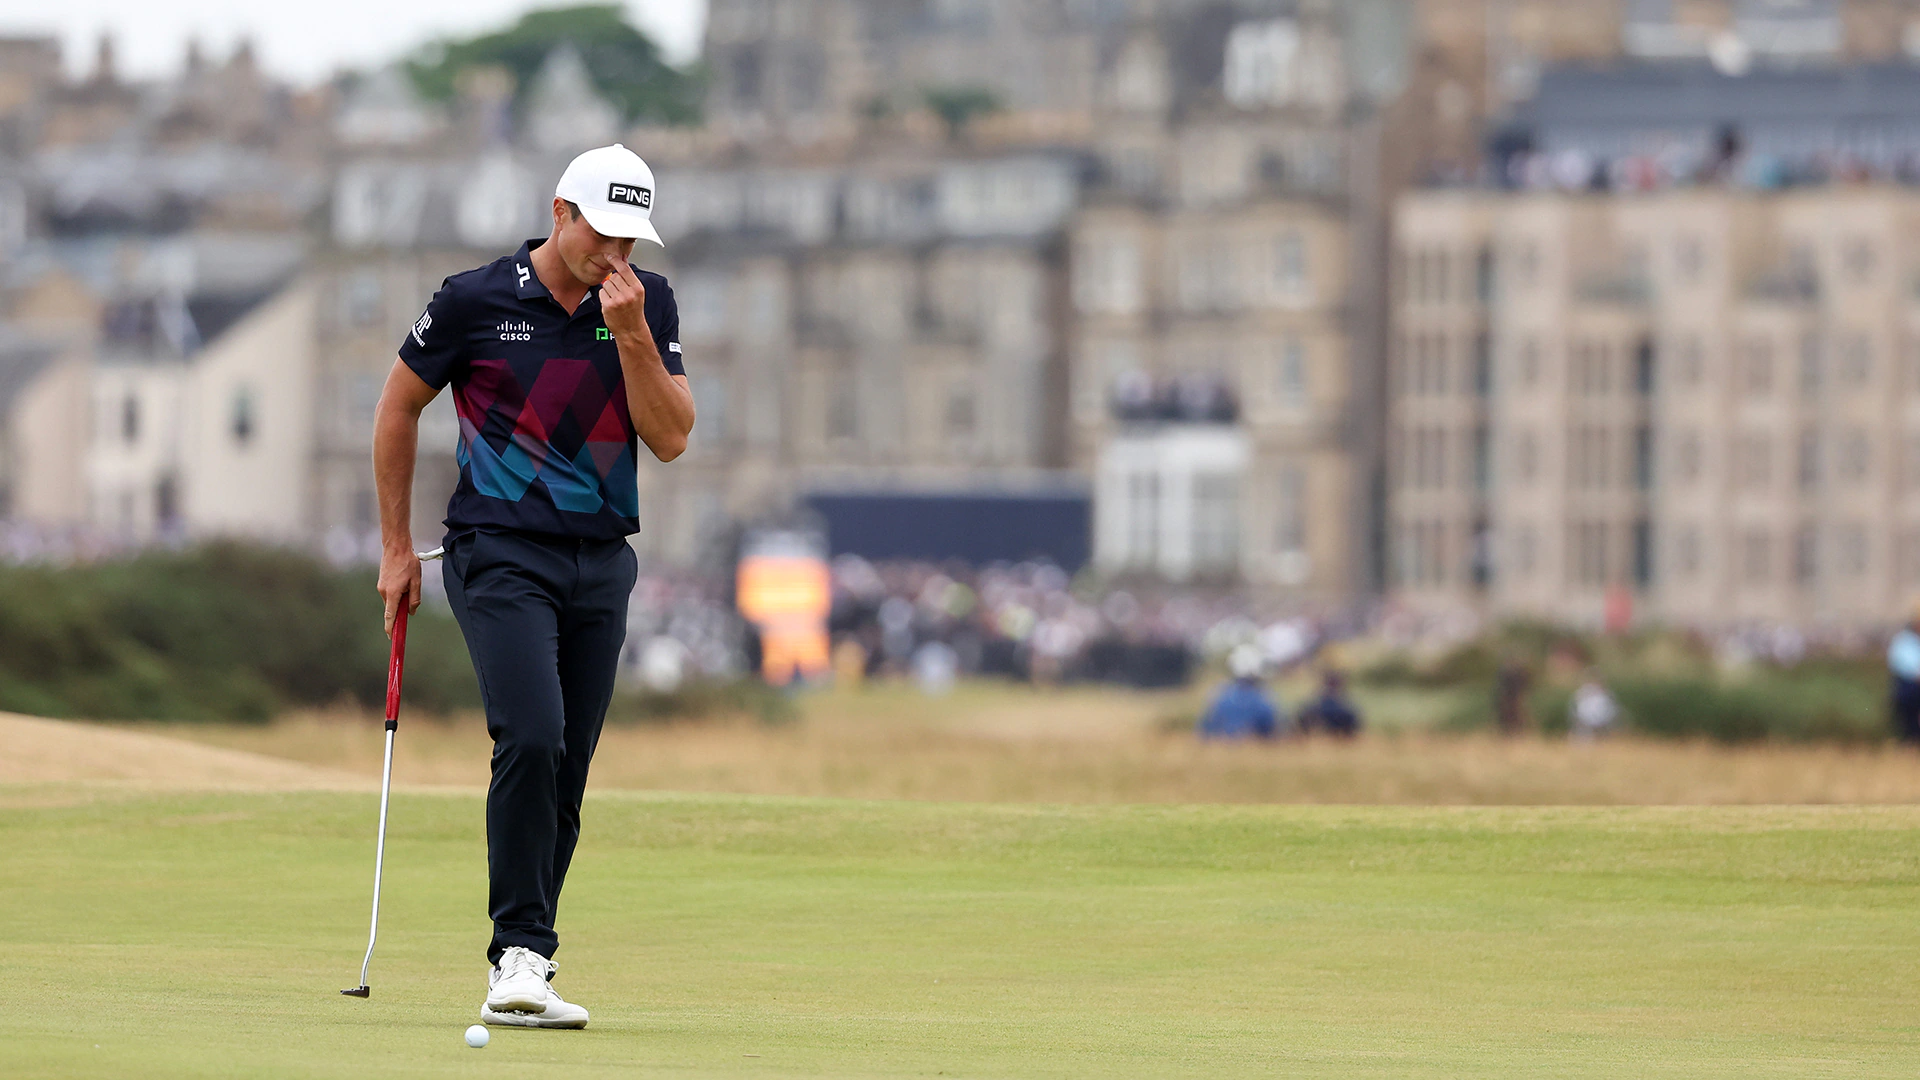 2022 British Open: 'A little anti-climactic': Viktor Hovland goes from co-lead to non-factor